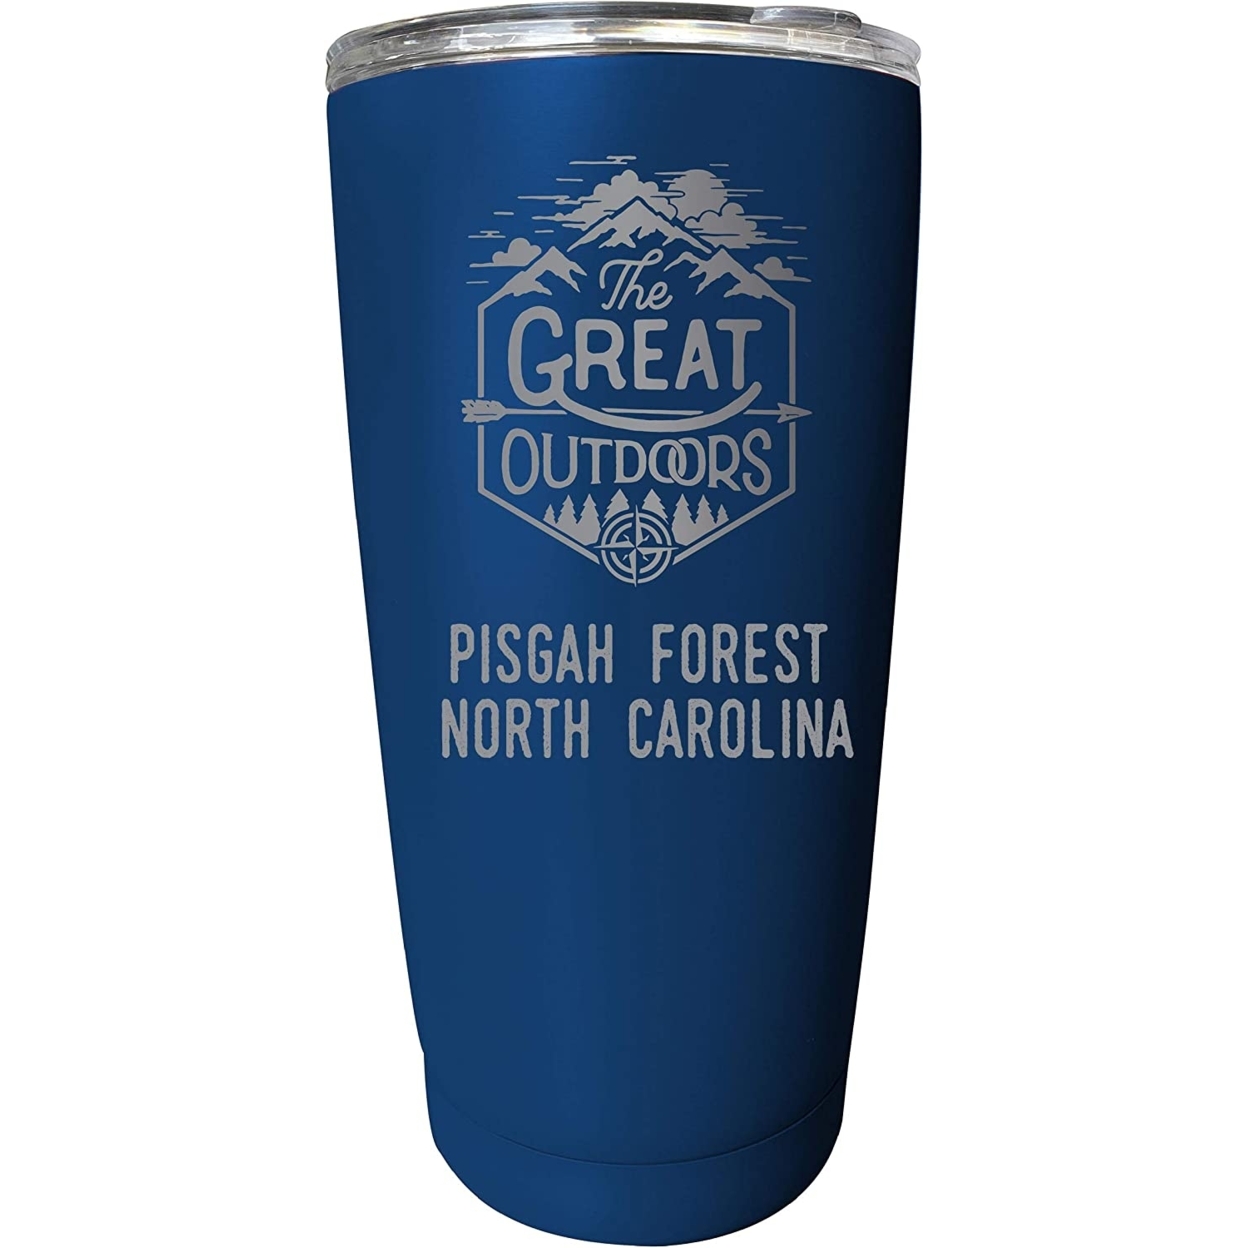 Pisgah Forest North Carolina Etched 16 Oz Stainless Steel Insulated Tumbler Outdoor Adventure Design - White